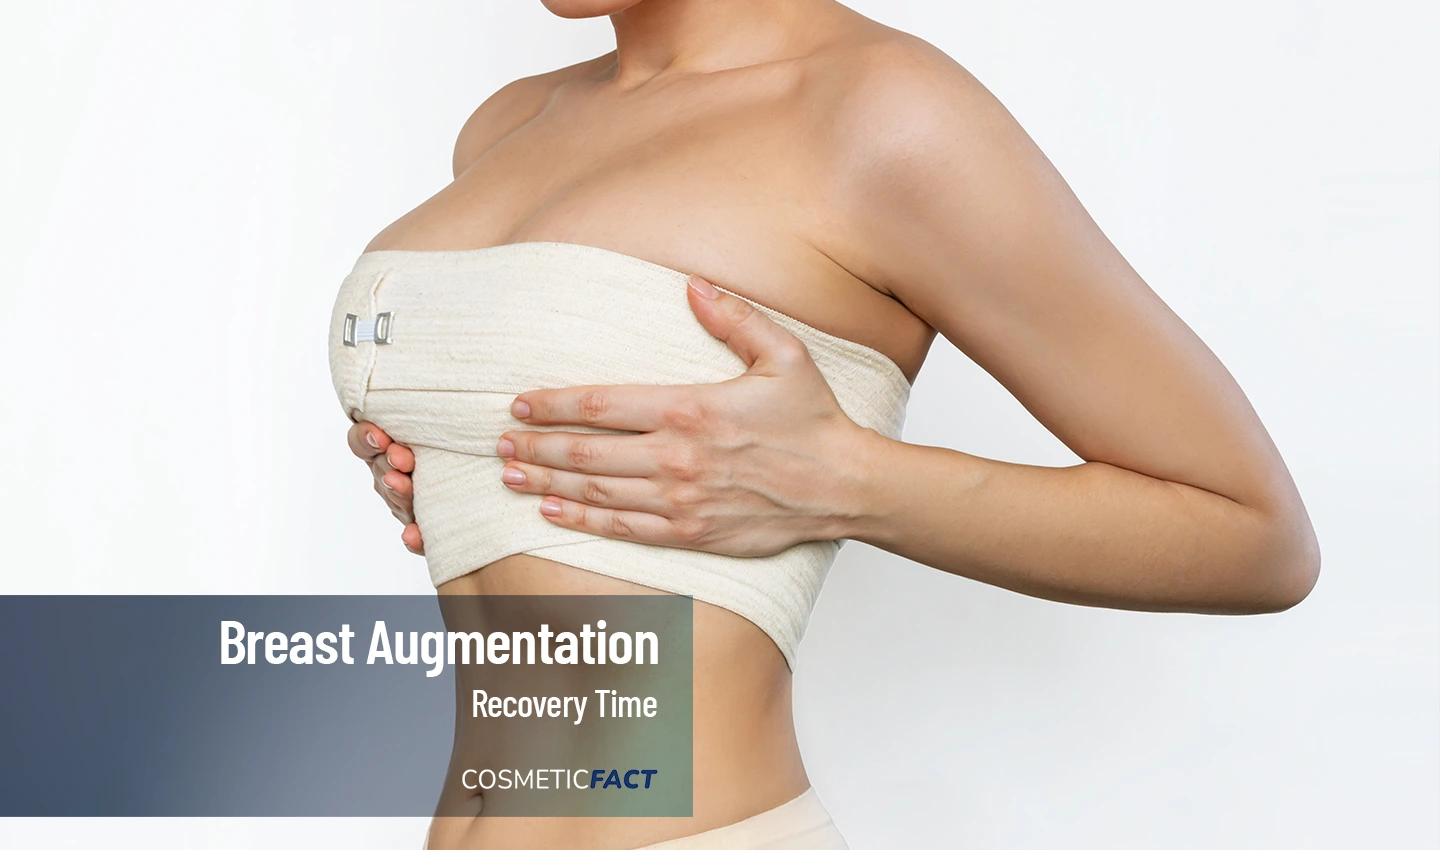 Woman with bandage around her breast during the healing process of breast augmentation recovery.